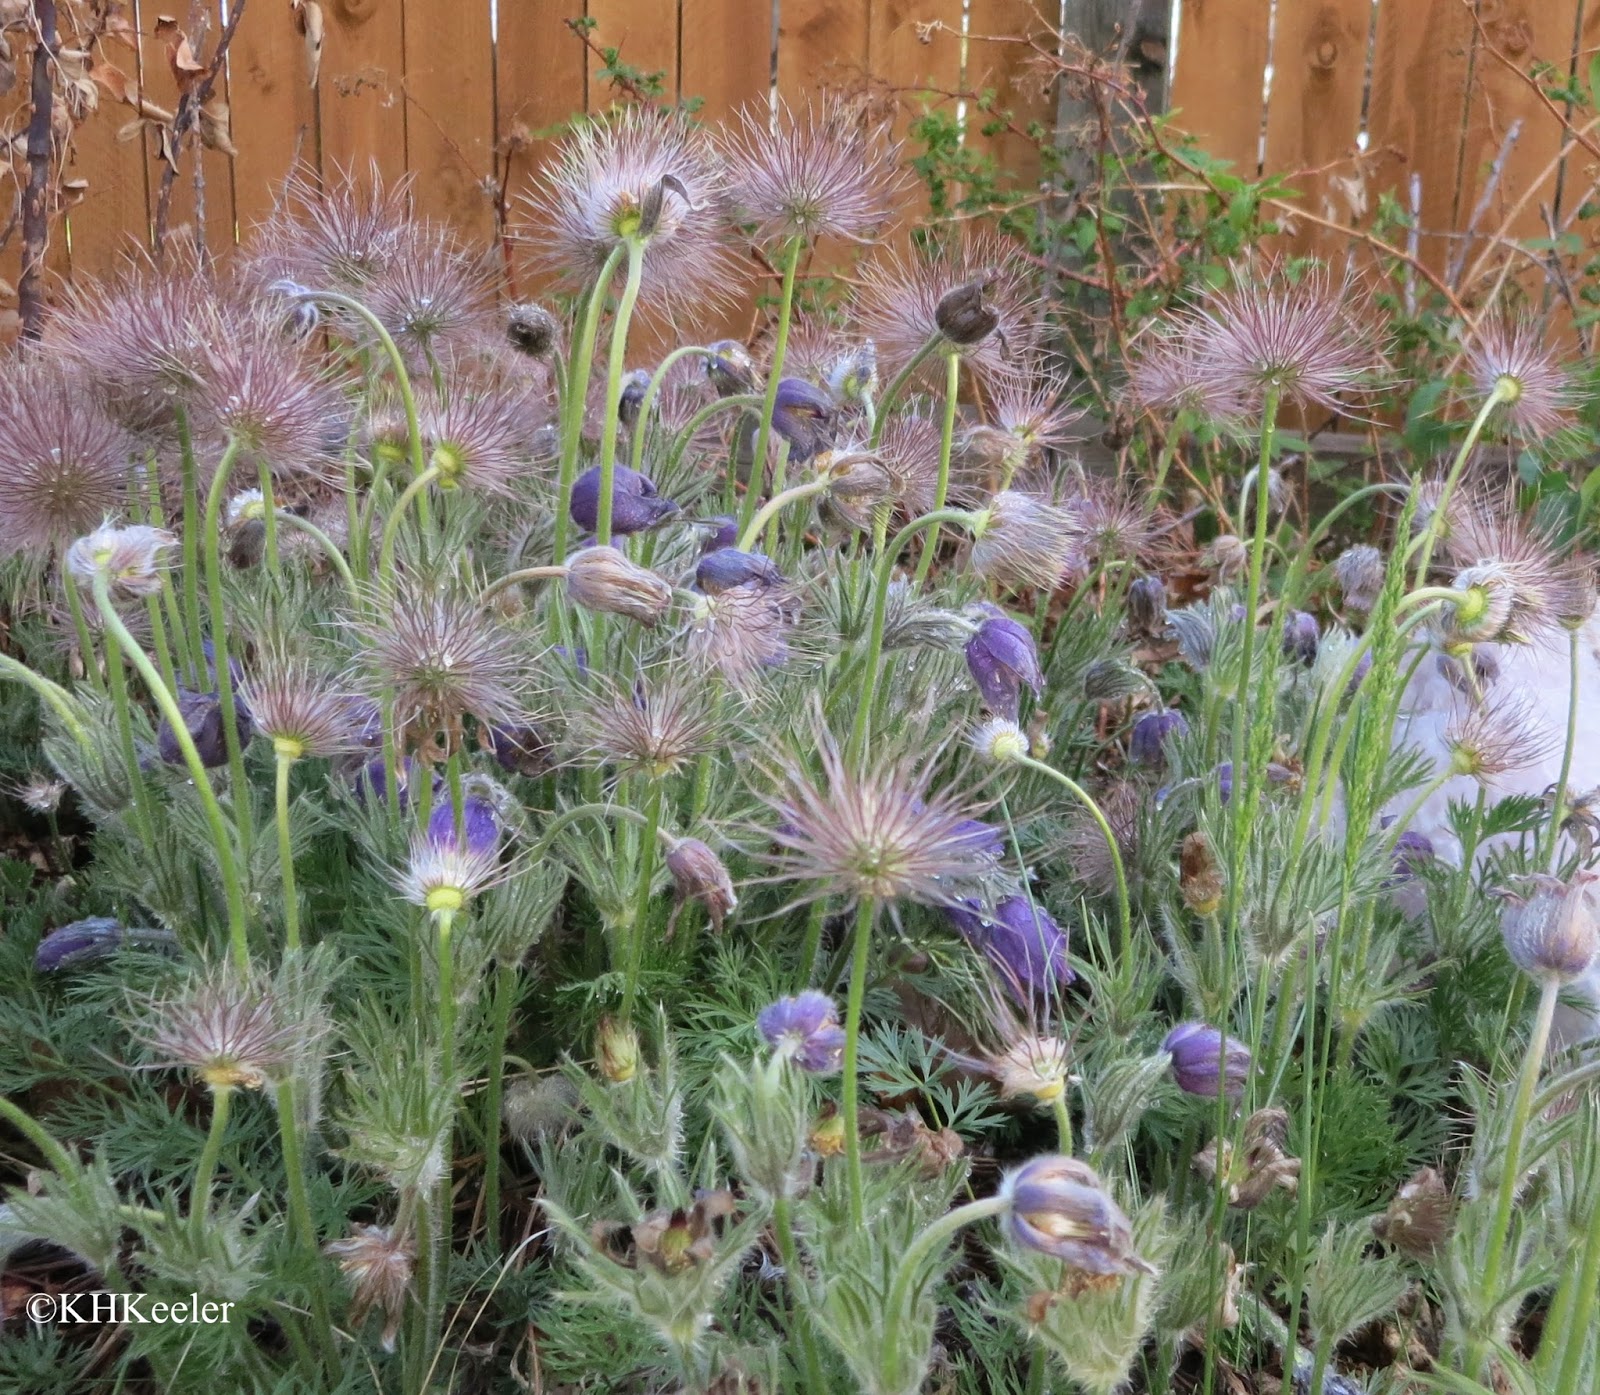 pasqueflower, Anemone patens, flowers and seed heads